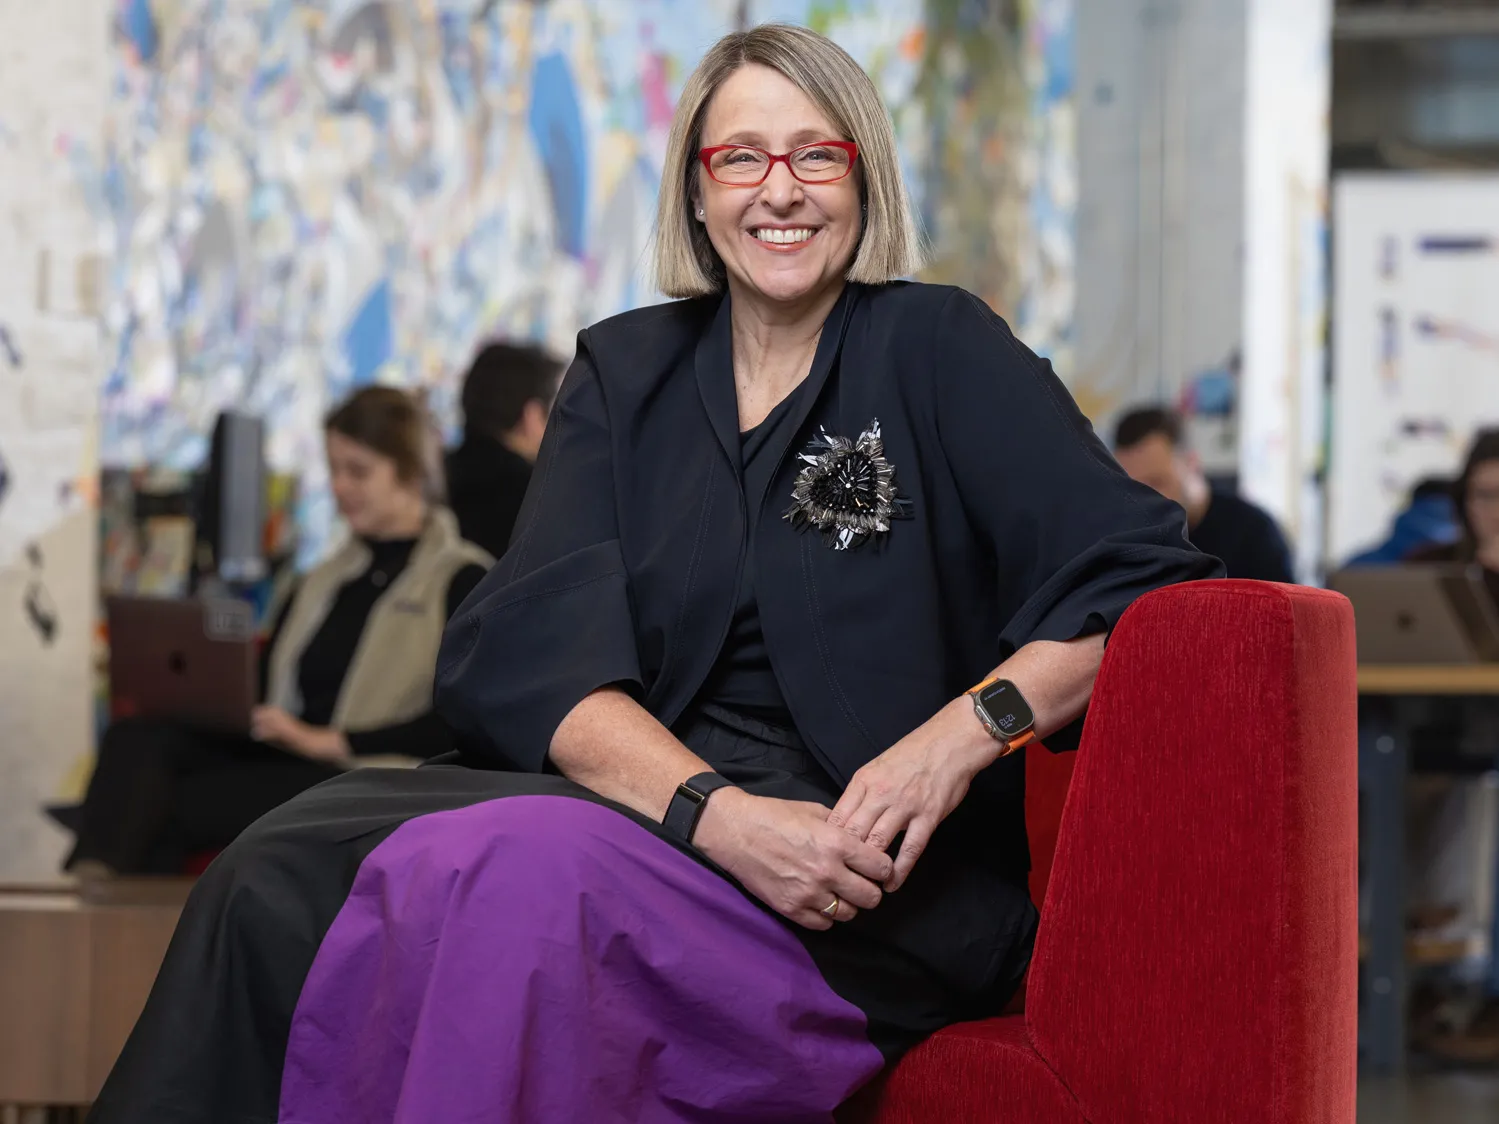 Betsy Ziegler sits on a modern upholstered chair in a space where many people in the background work or chat at small tables. A wall-size painting in the background adds to the lively feel of the scene, while Betsy poses with a genuine smile at the center of it. The middle-age white woman looks comfortable and stylish, with a chin-length haircut, stand-out glasses, modern-shaped clothes and a striking beaded broach that shines but also looks organically shaped. 